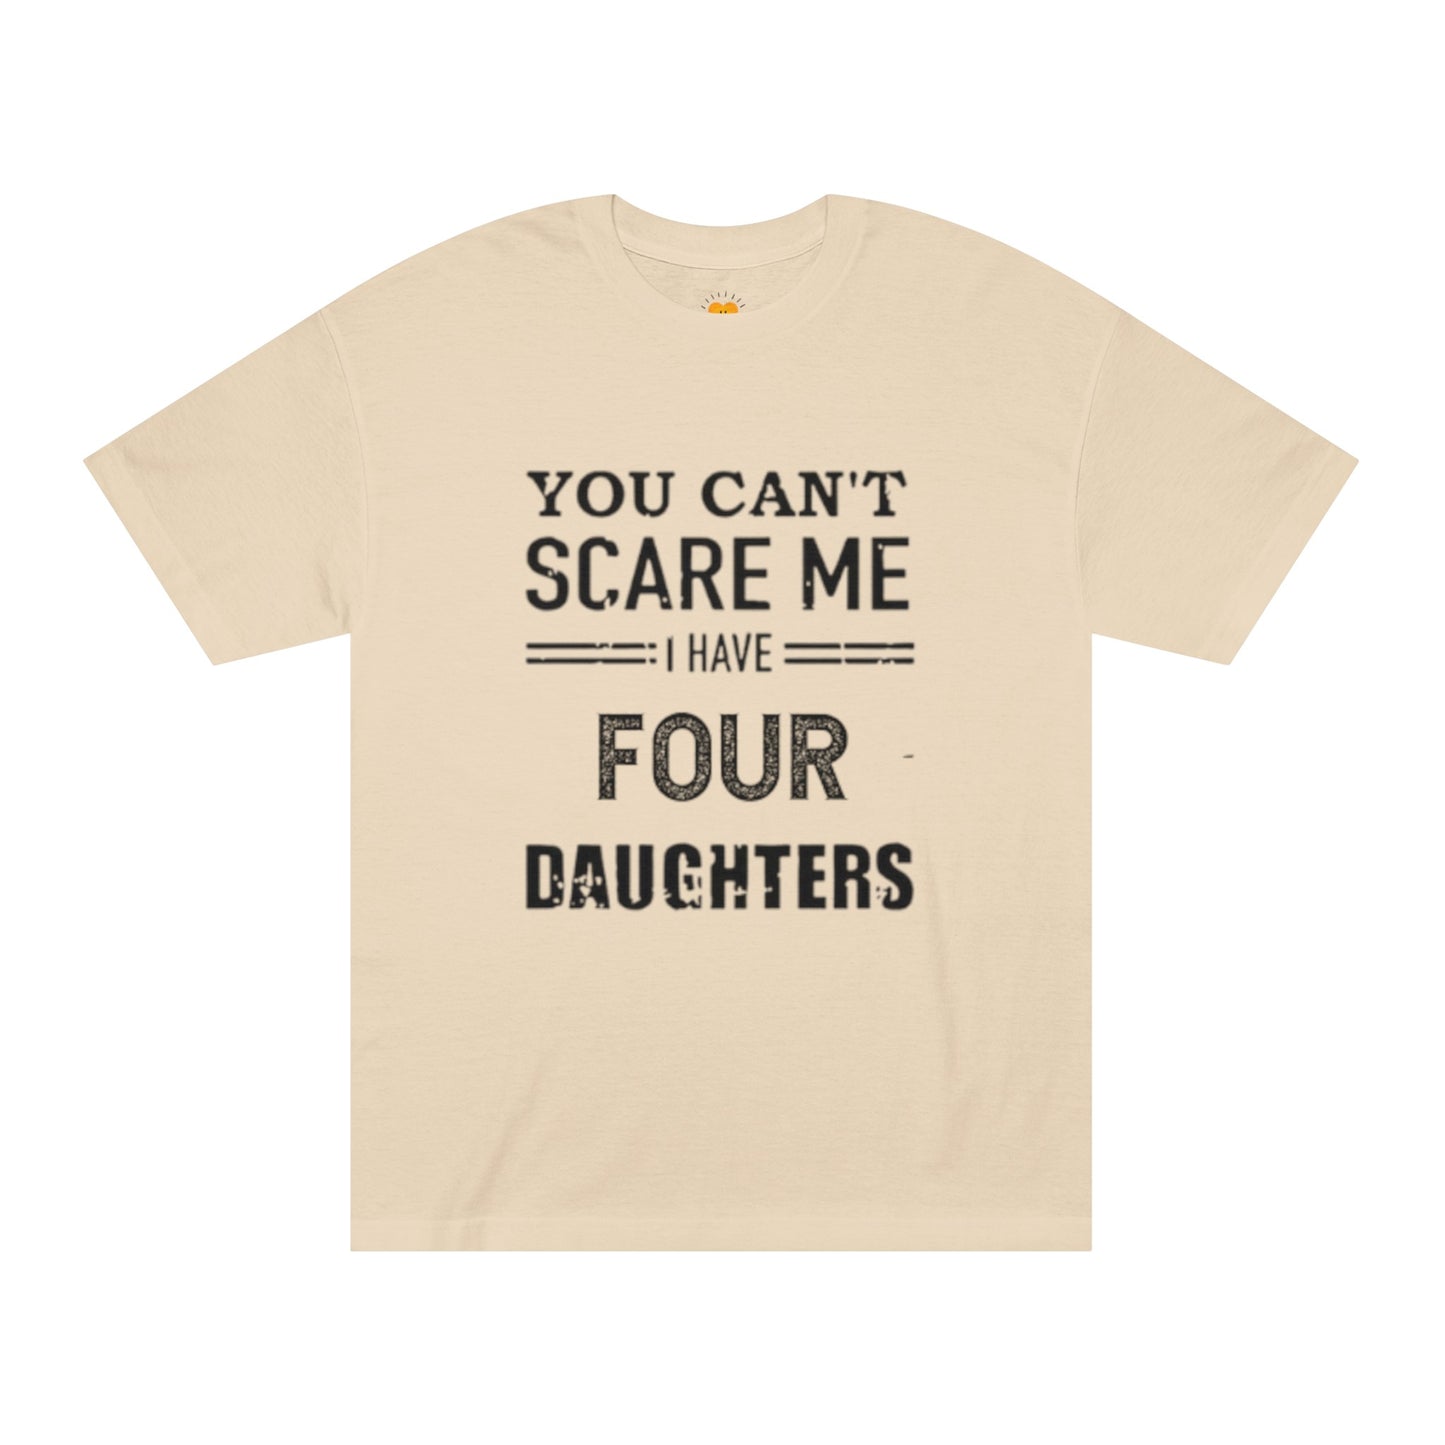 Can't Scare Me FOUR Daughters Classic Tee